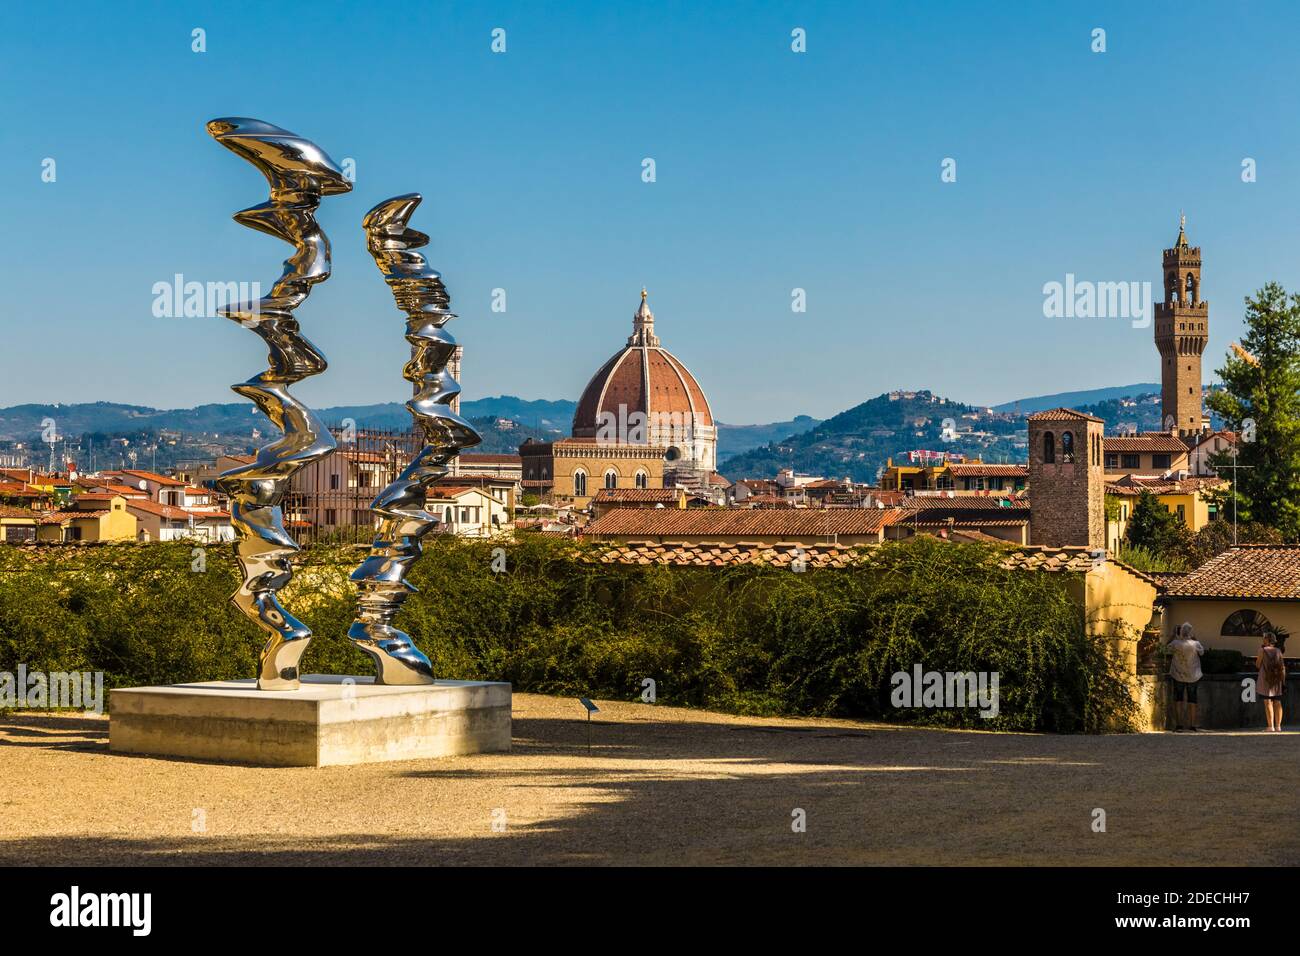 Gorgeous panoramic rooftop view of Florence with the stainless steel sculptures Elliptical Column and Points of View by Tony Cragg in front. The Duomo... Stock Photo